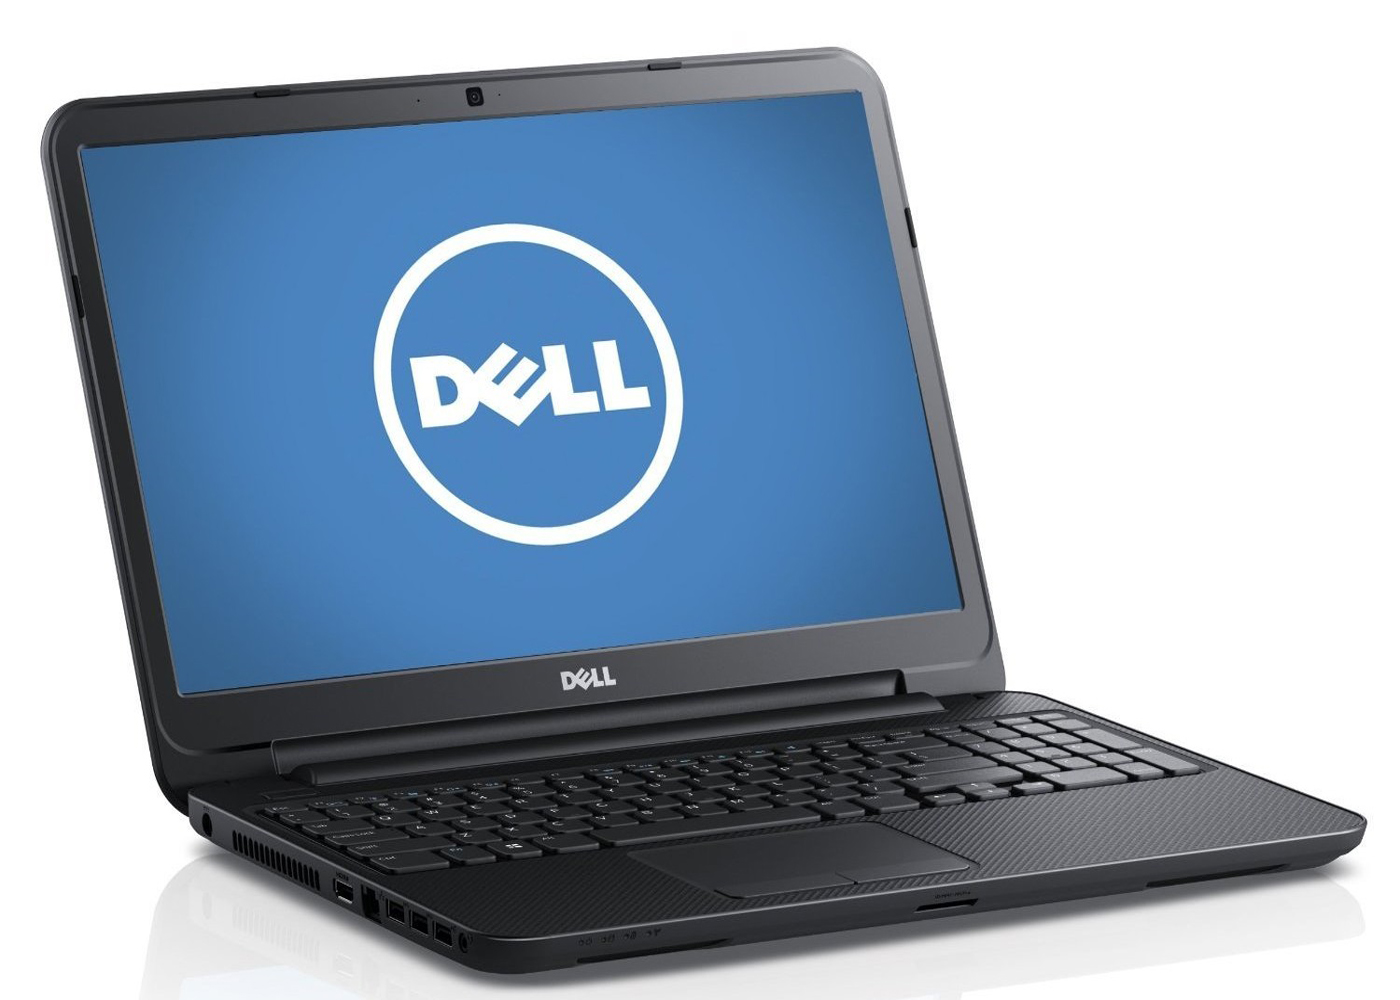 About the Dell Inspiron 15 3521 15.6inch Laptop Black Features and 